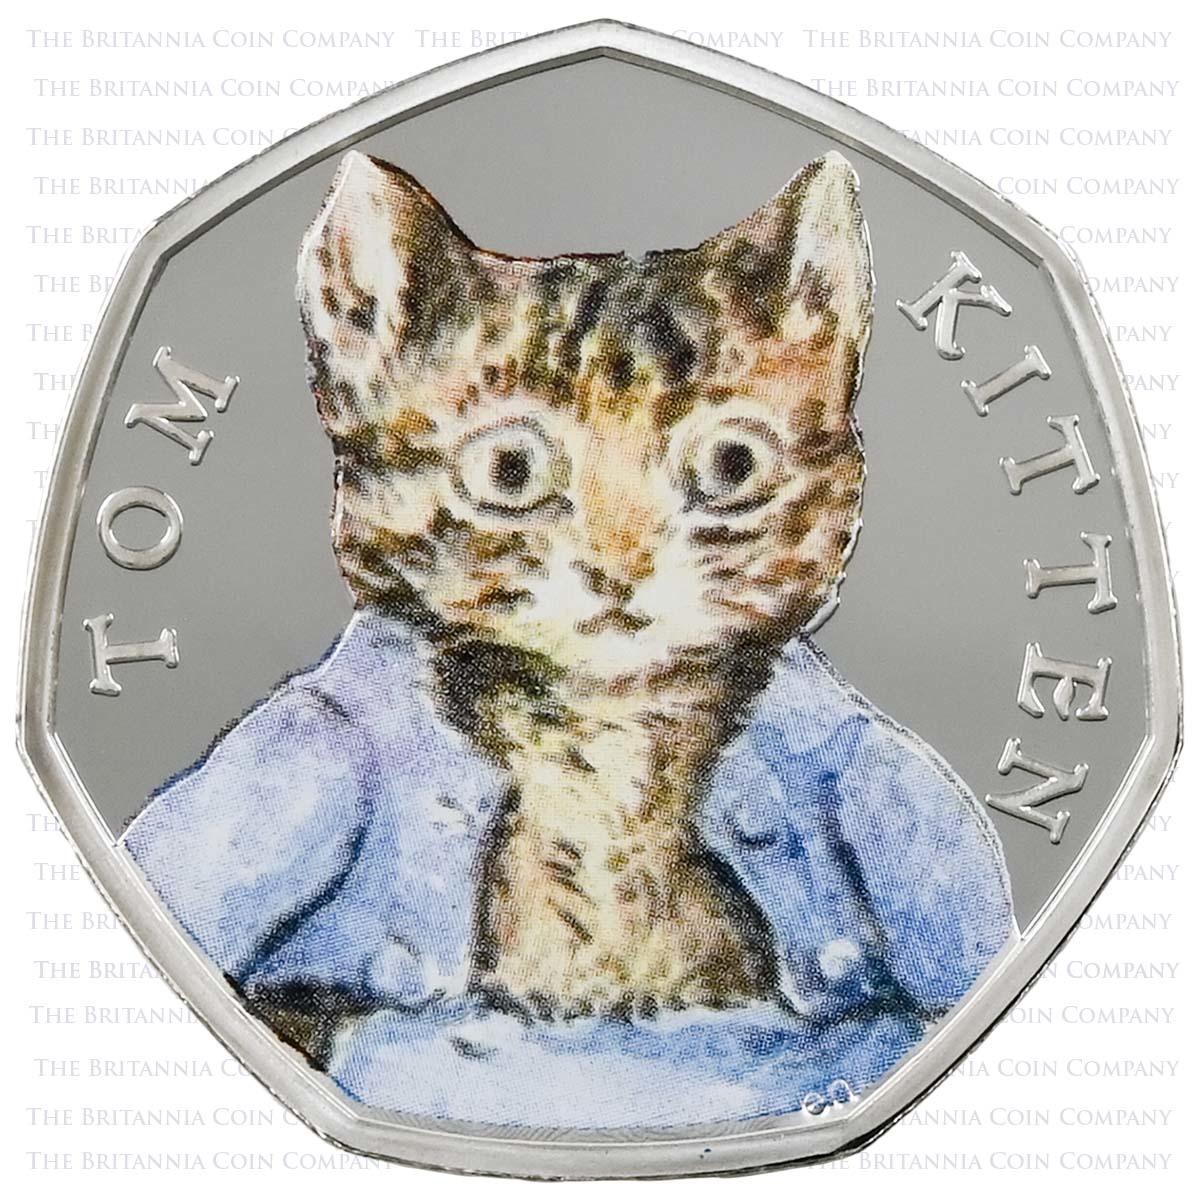 UK17TKSP 2017 Beatrix Potter Tom Kitten Fifty Pence Colour Printed Silver Proof Coin Reverse